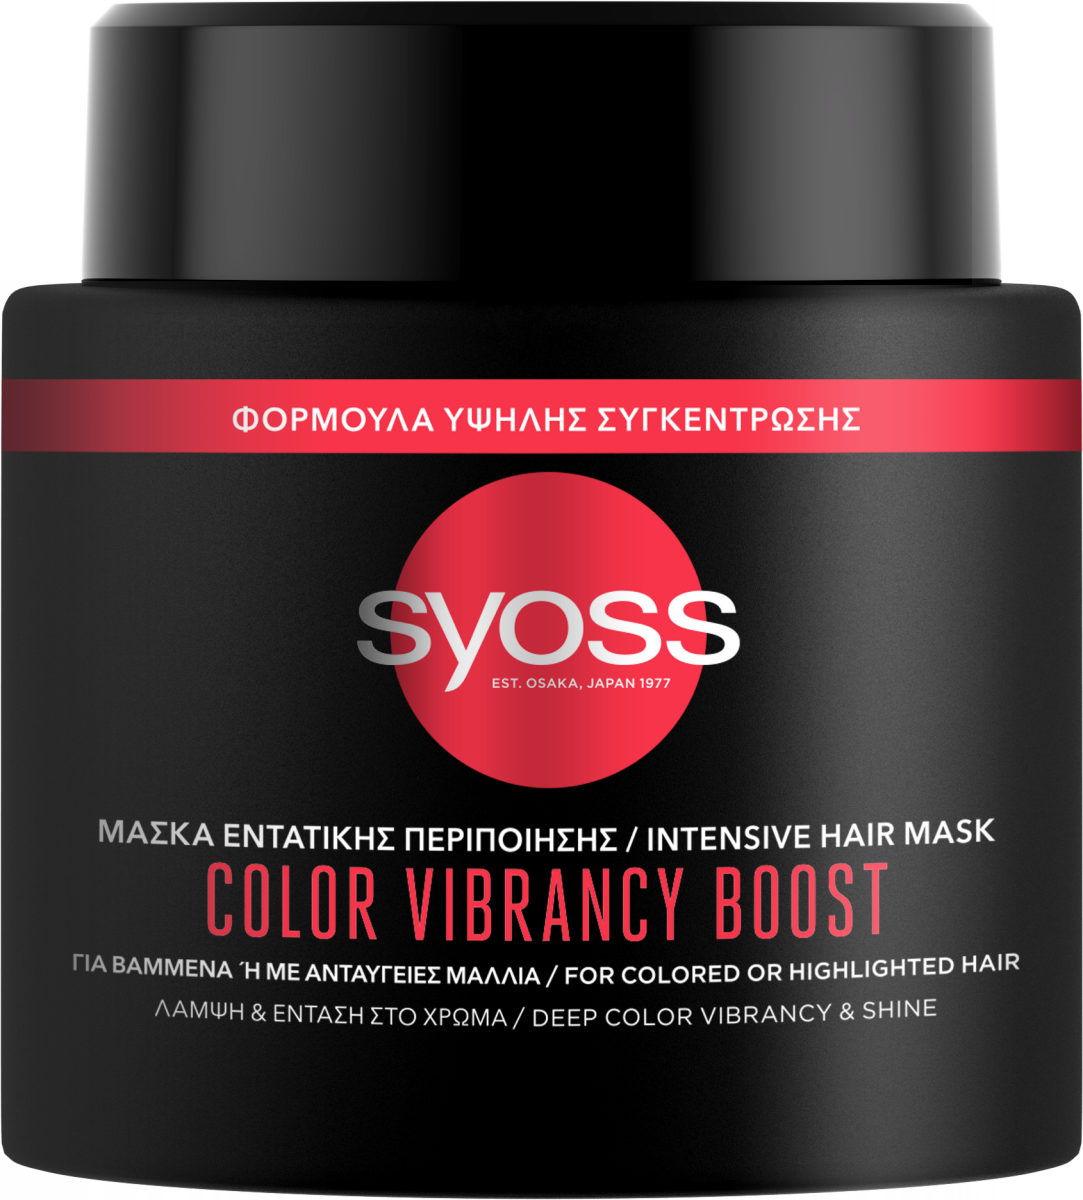 Syoss Color Vibrancy Boost